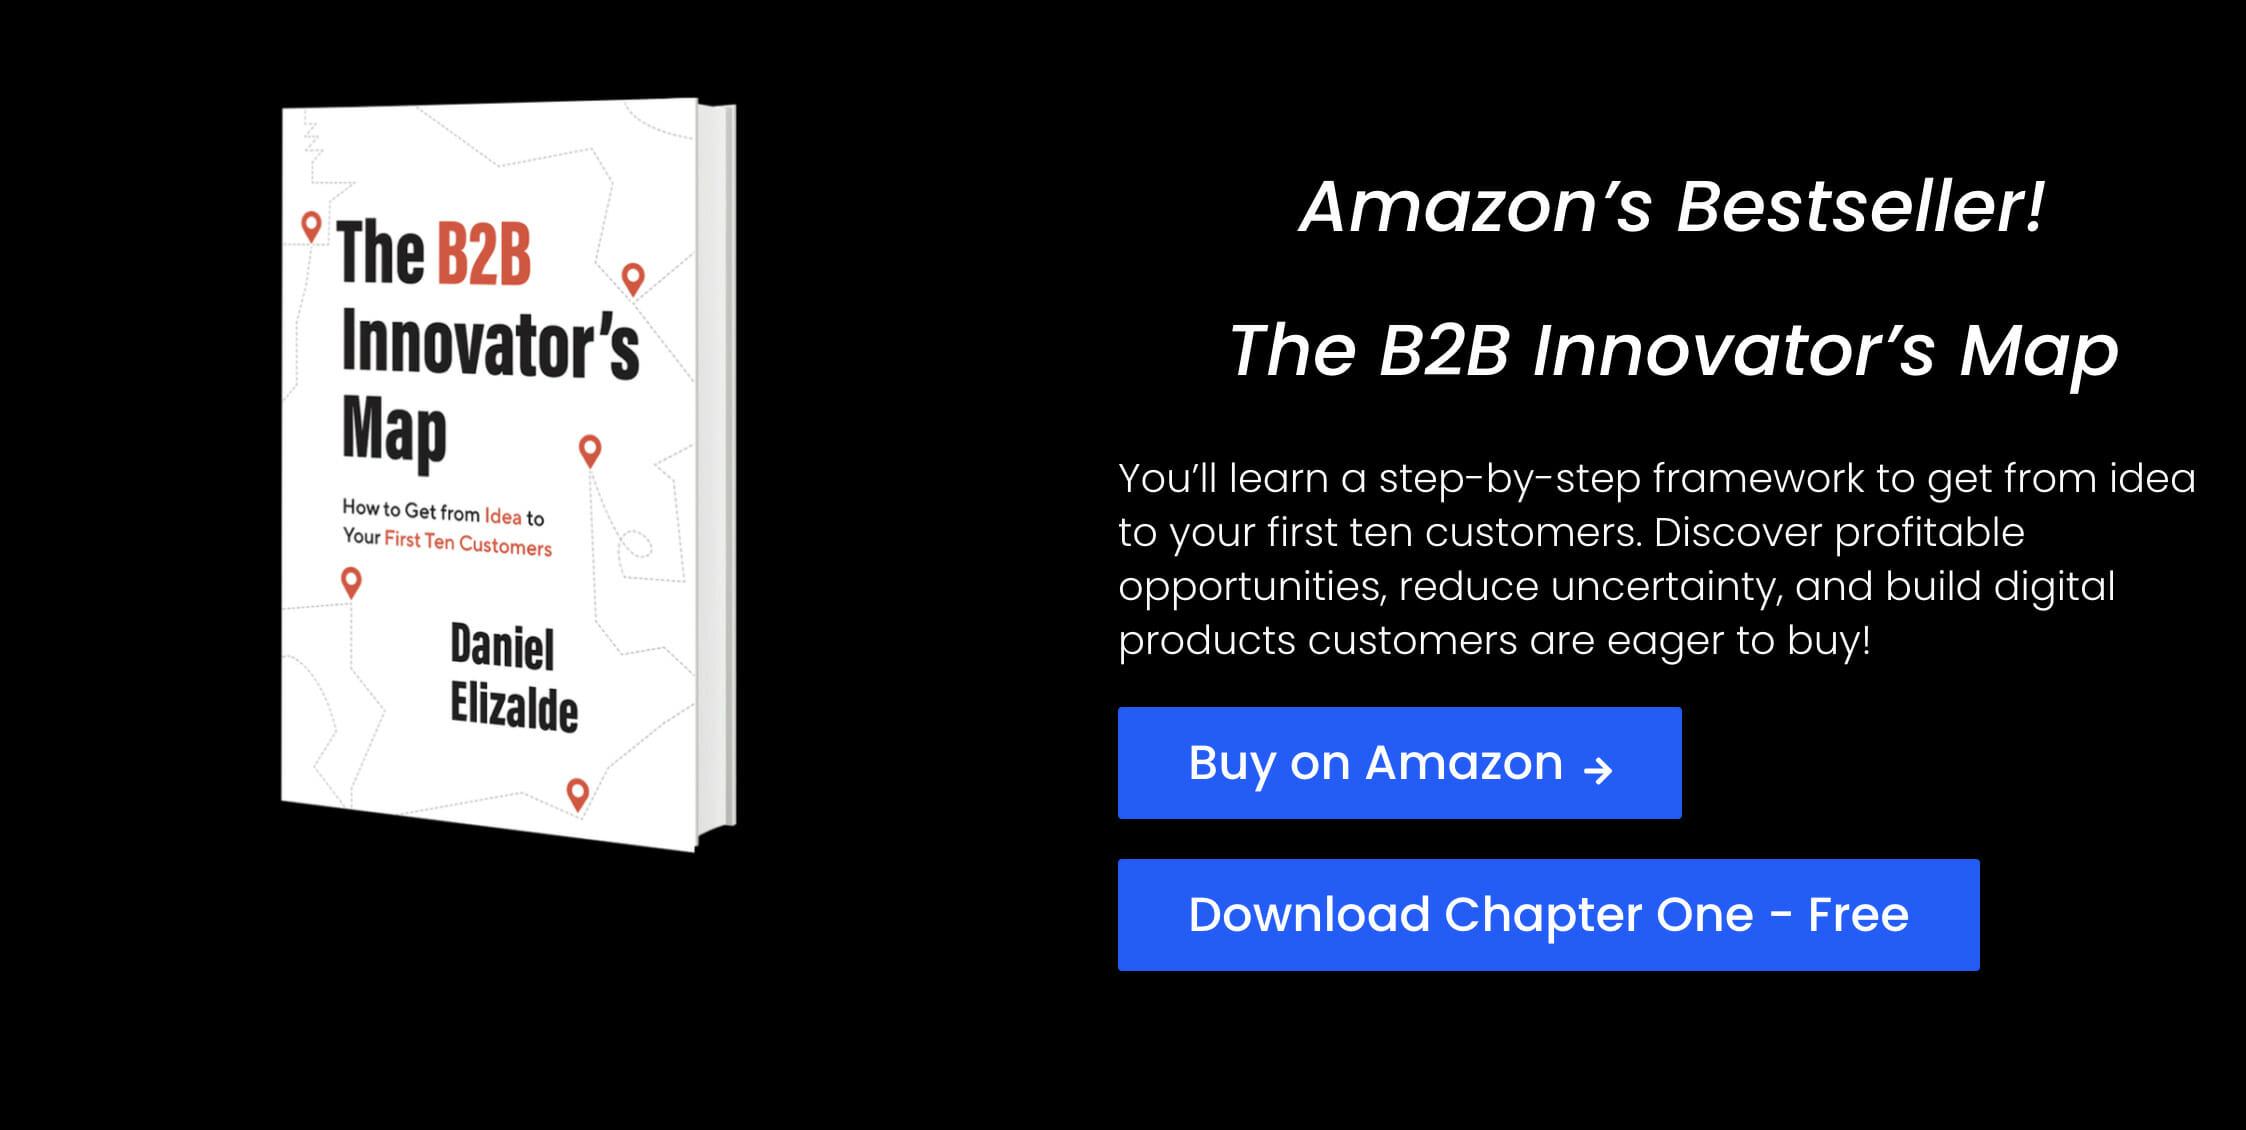 The B2B Innovator's Map - How to get ideas from your first ten customers' - free chapter!